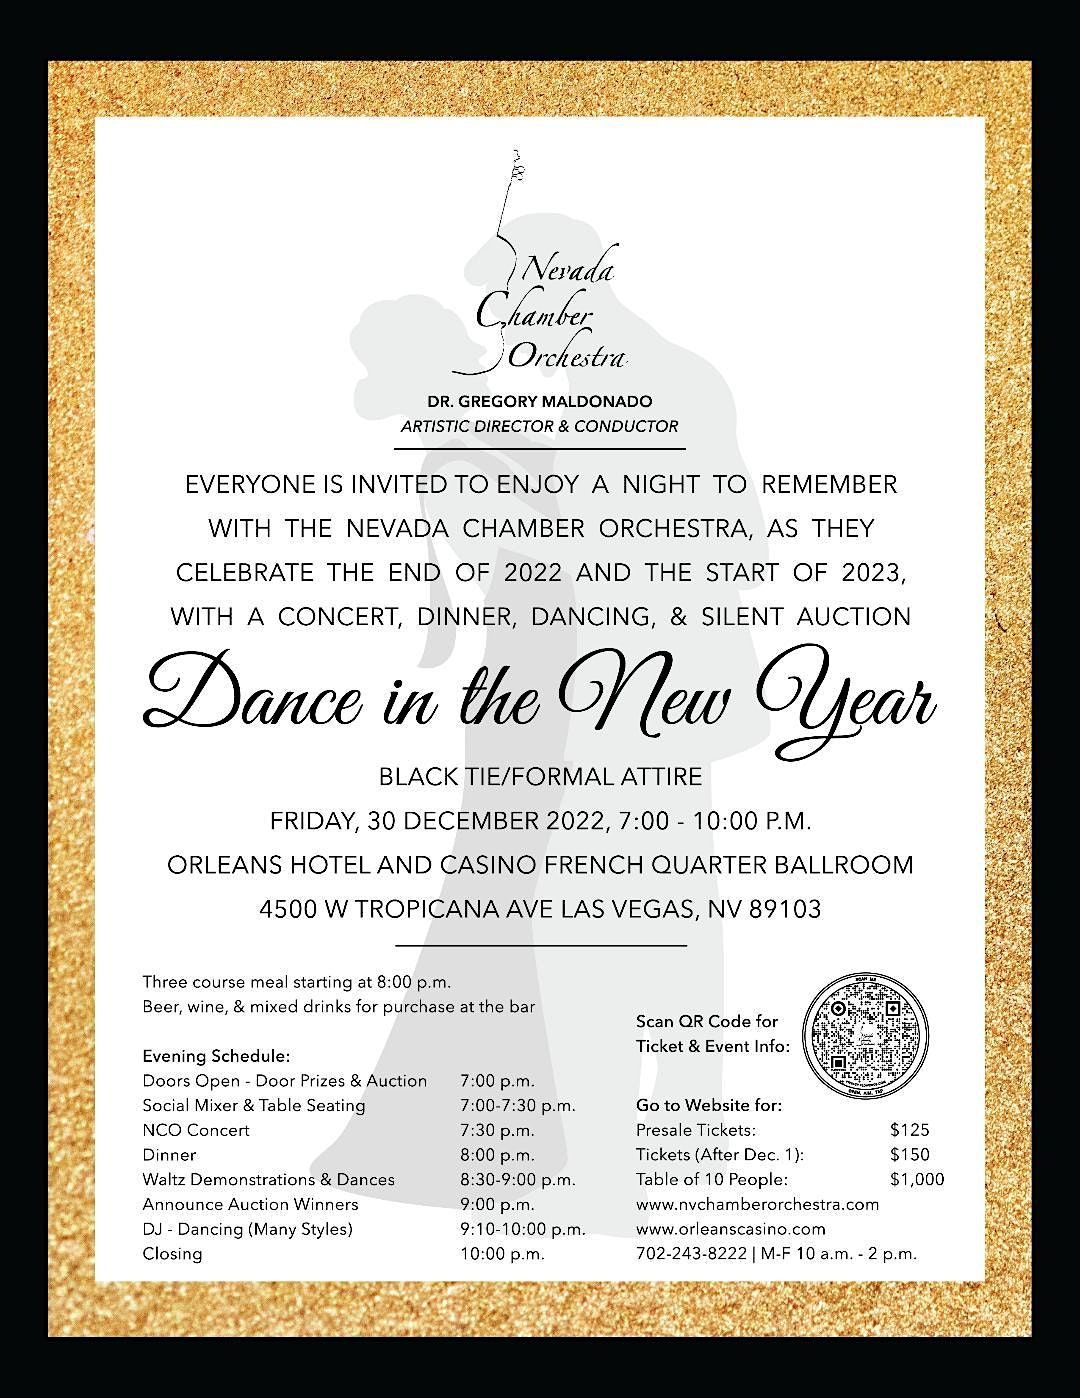 Copy of Concert, Dinner and Dance